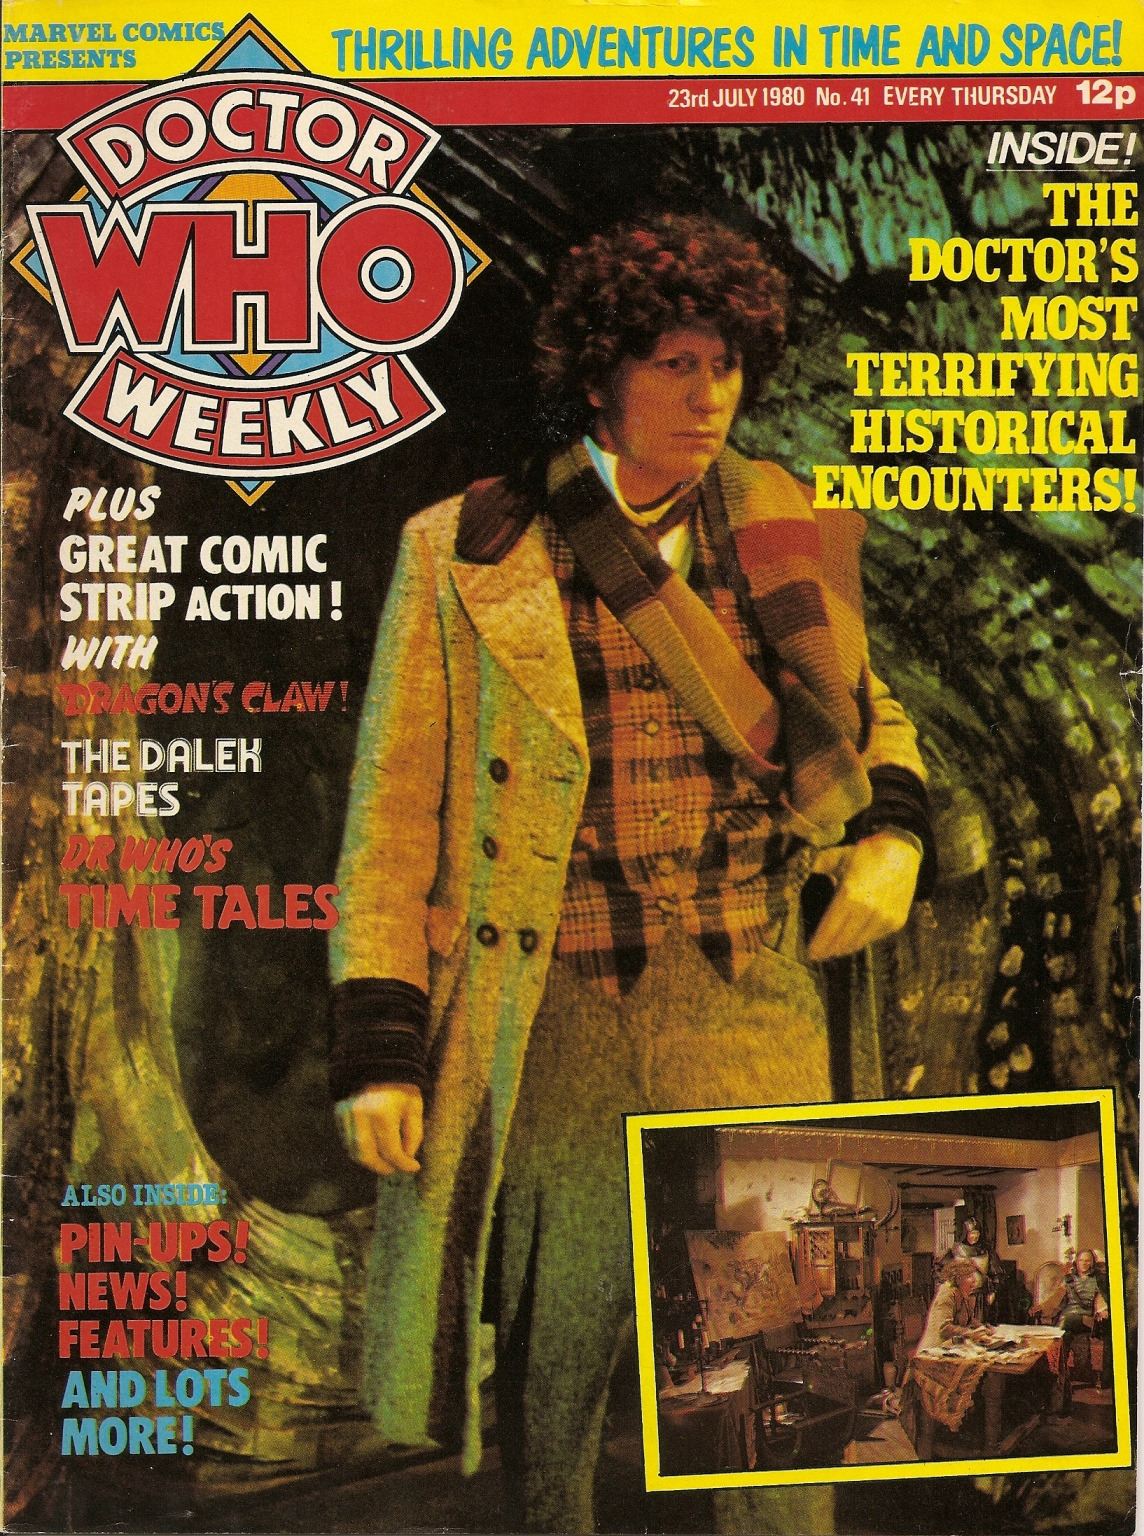 Doctor Who Weekly - Issue 41 - 23rd July 1980